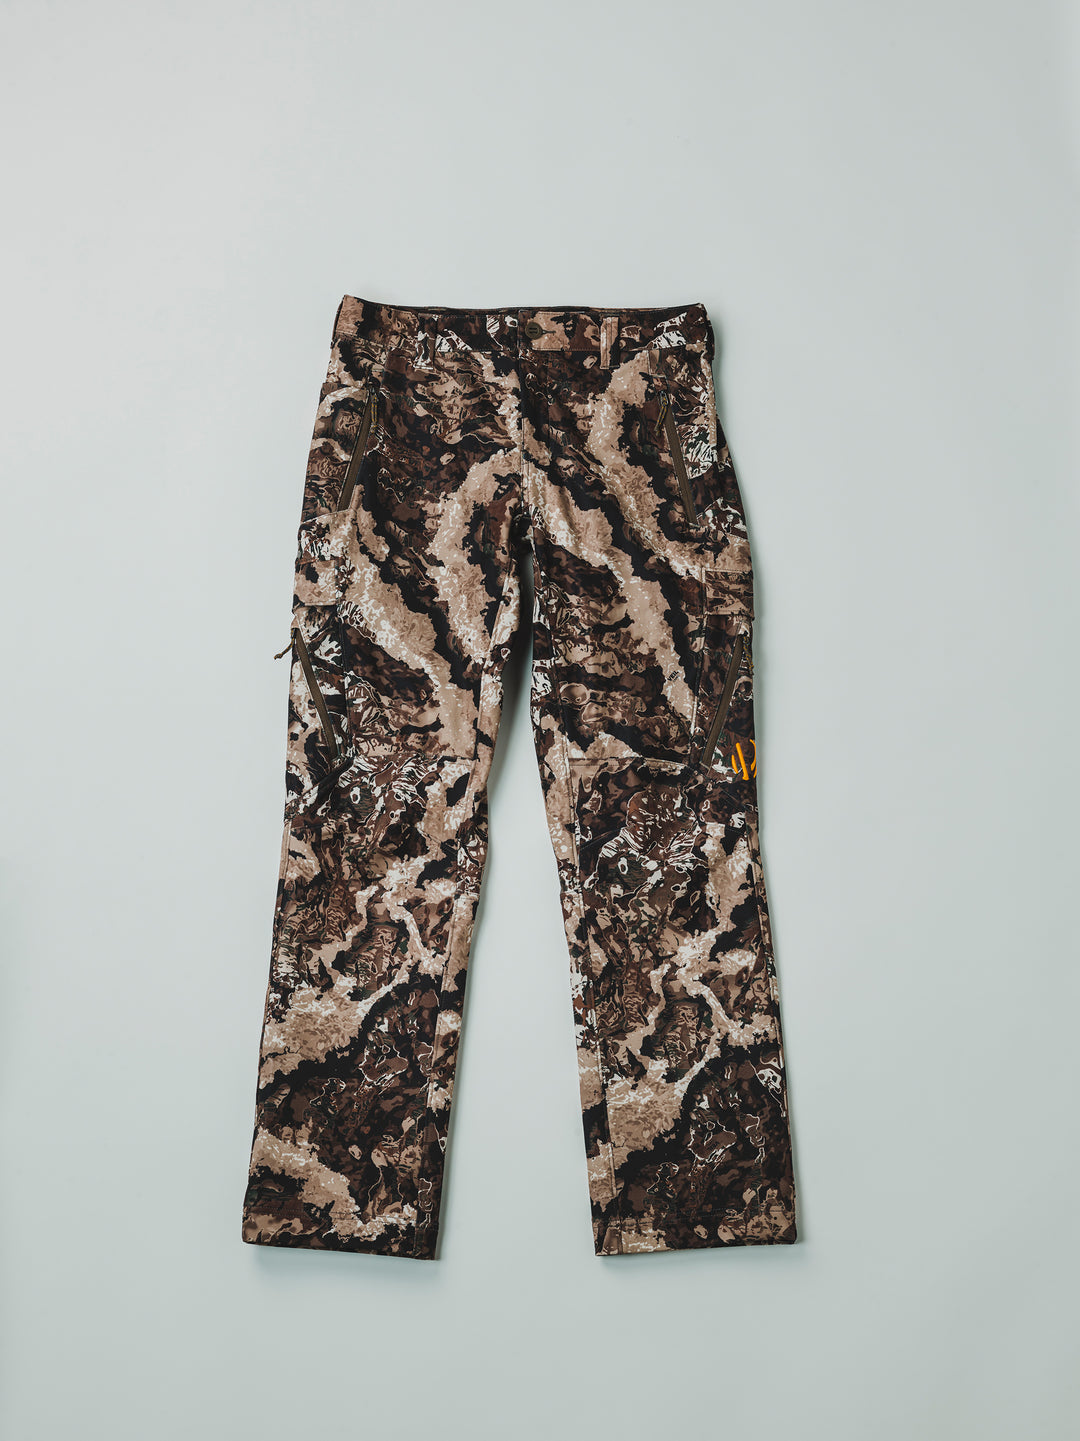 The Veil® Camo Field Pant is the most talked-about pant coming out for your next hunt. This multi-season, multi-purpose pant is comfortable and offers an athletic fit. With double weave 4-way stretch you can't go wrong with this pant!  PROTECTION Quick-drying, Windproof, Water Resistant. MATERIAL Exterior: 92% Polyester 8% Synthetic Fiber. FIT: Midweight and Multi-Season. CONDITIONS Mild, Dry, Cold, Wet, Wind. PATTERN Veil® Camo in Grind.Multi-Season Gear & Pursuits